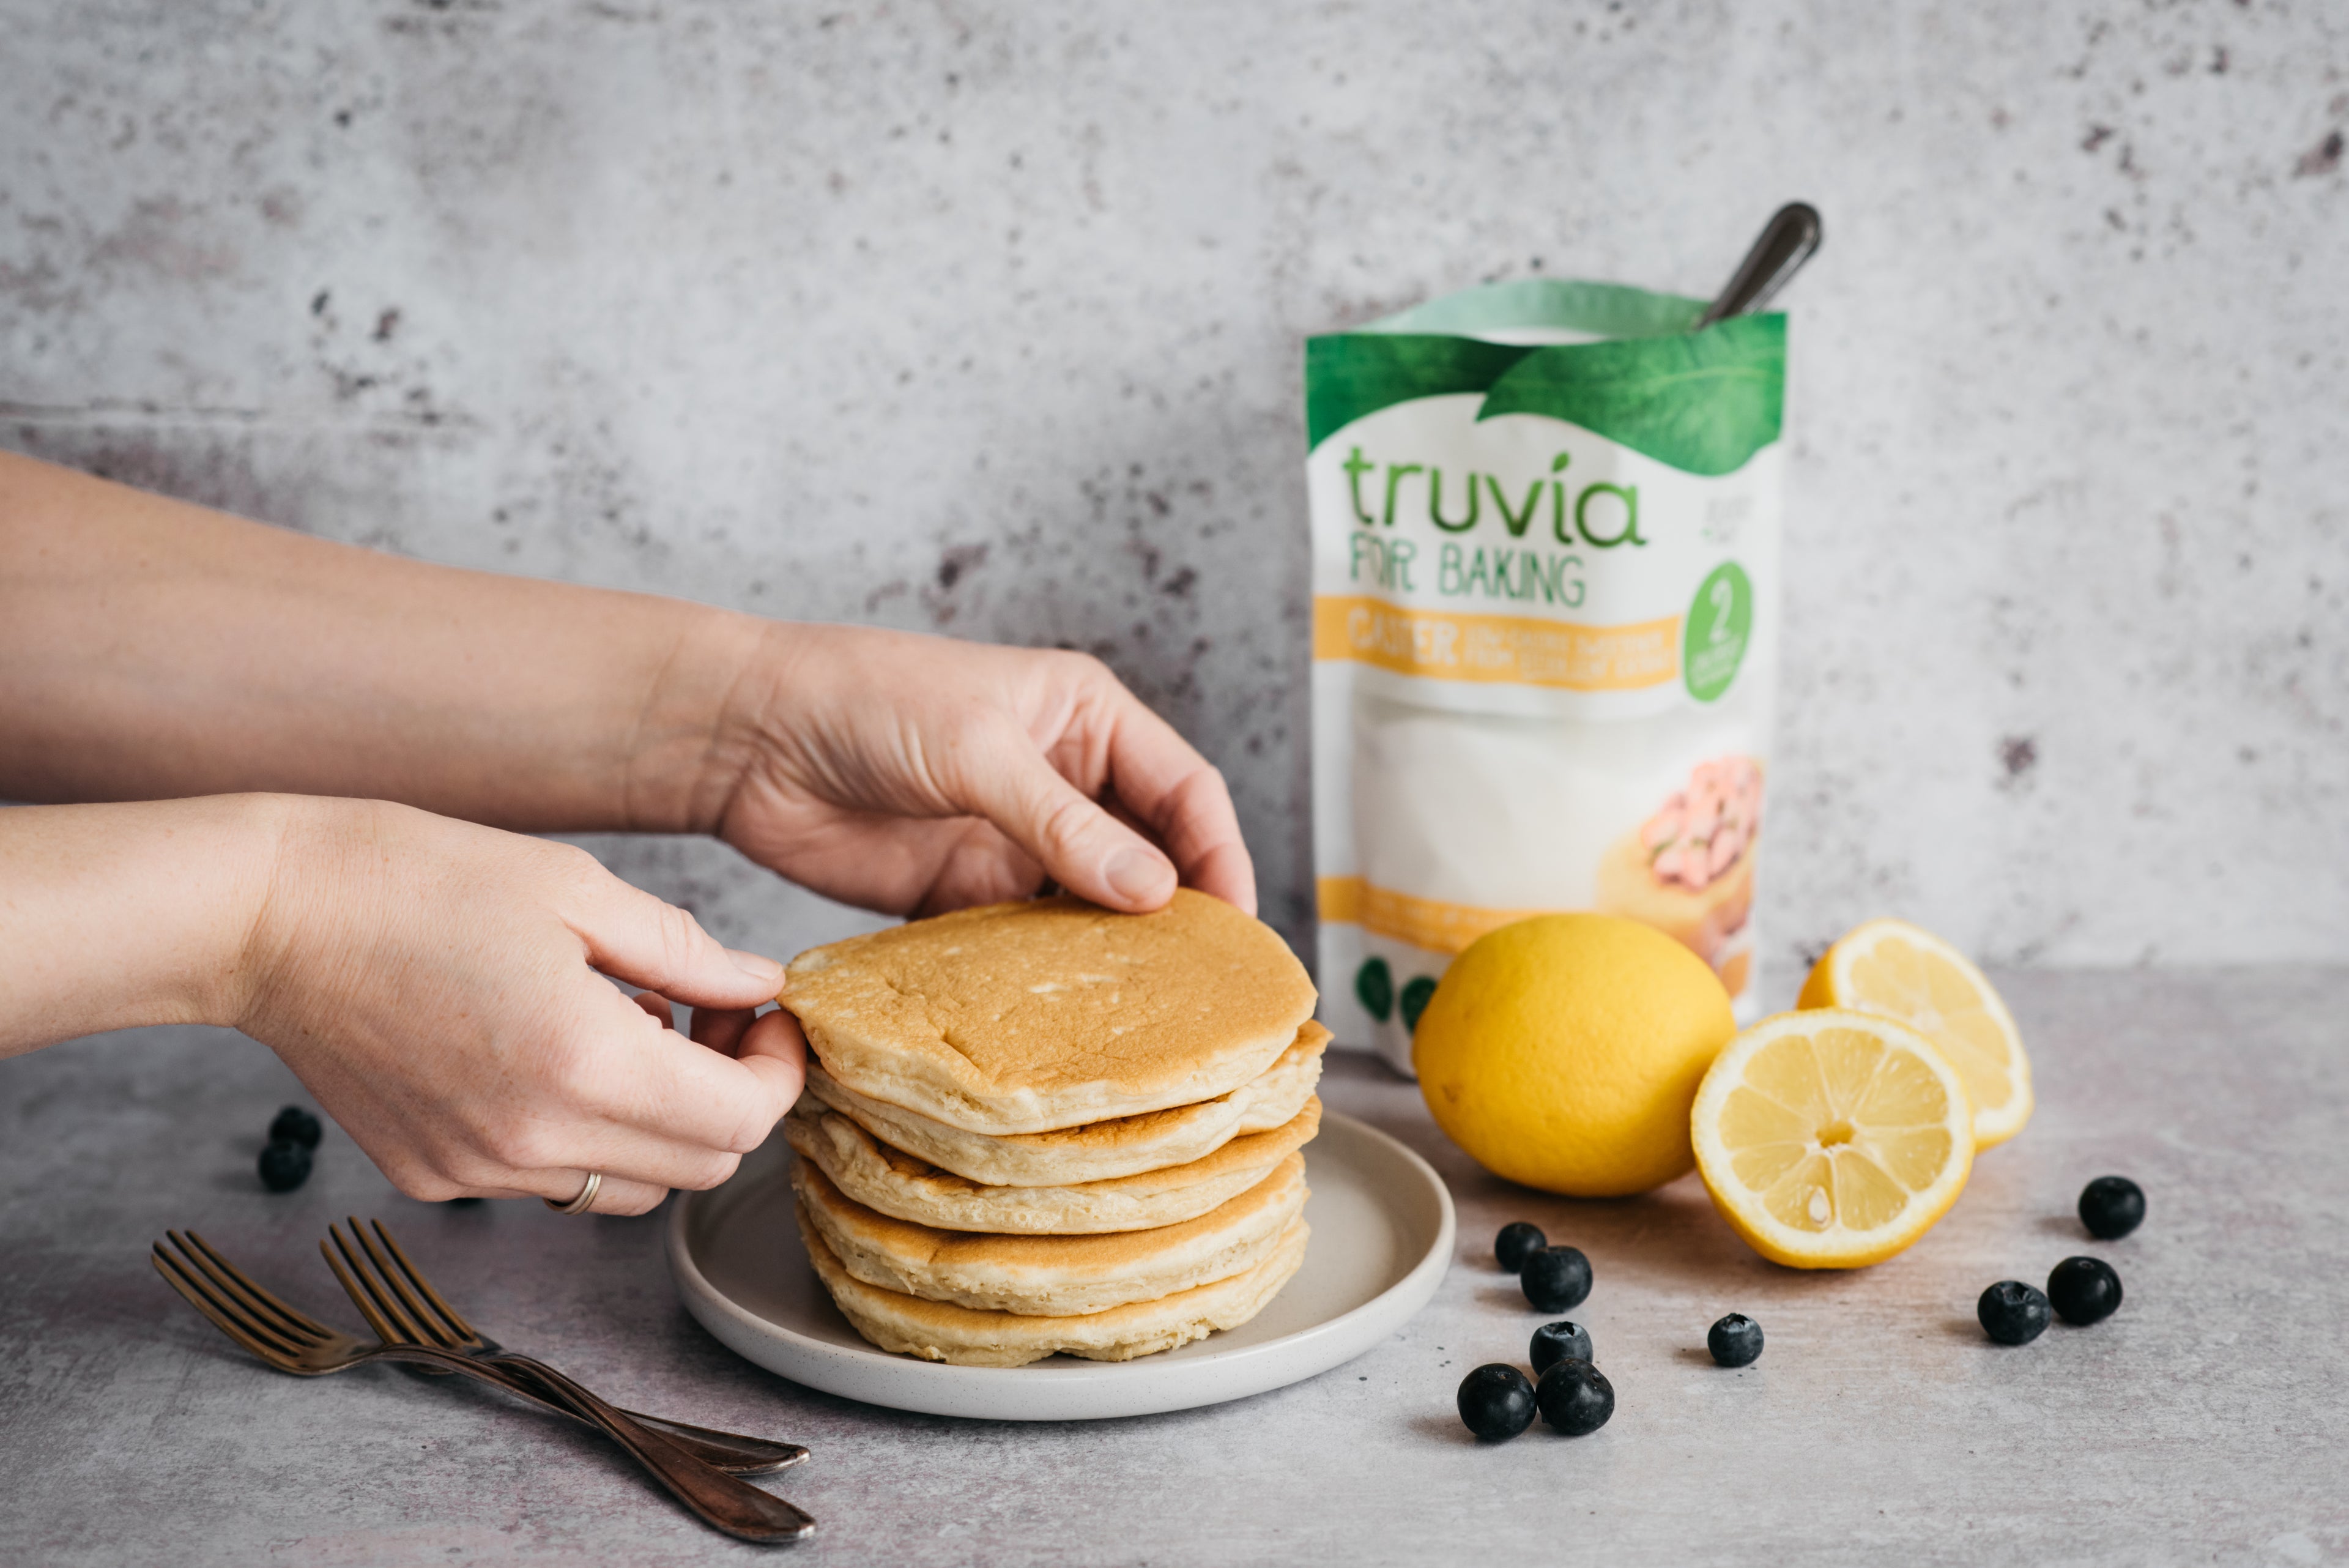 Hands stacking cinnamon pancakes, next to scattered blueberries and a bag of Truvia for Baking Caster